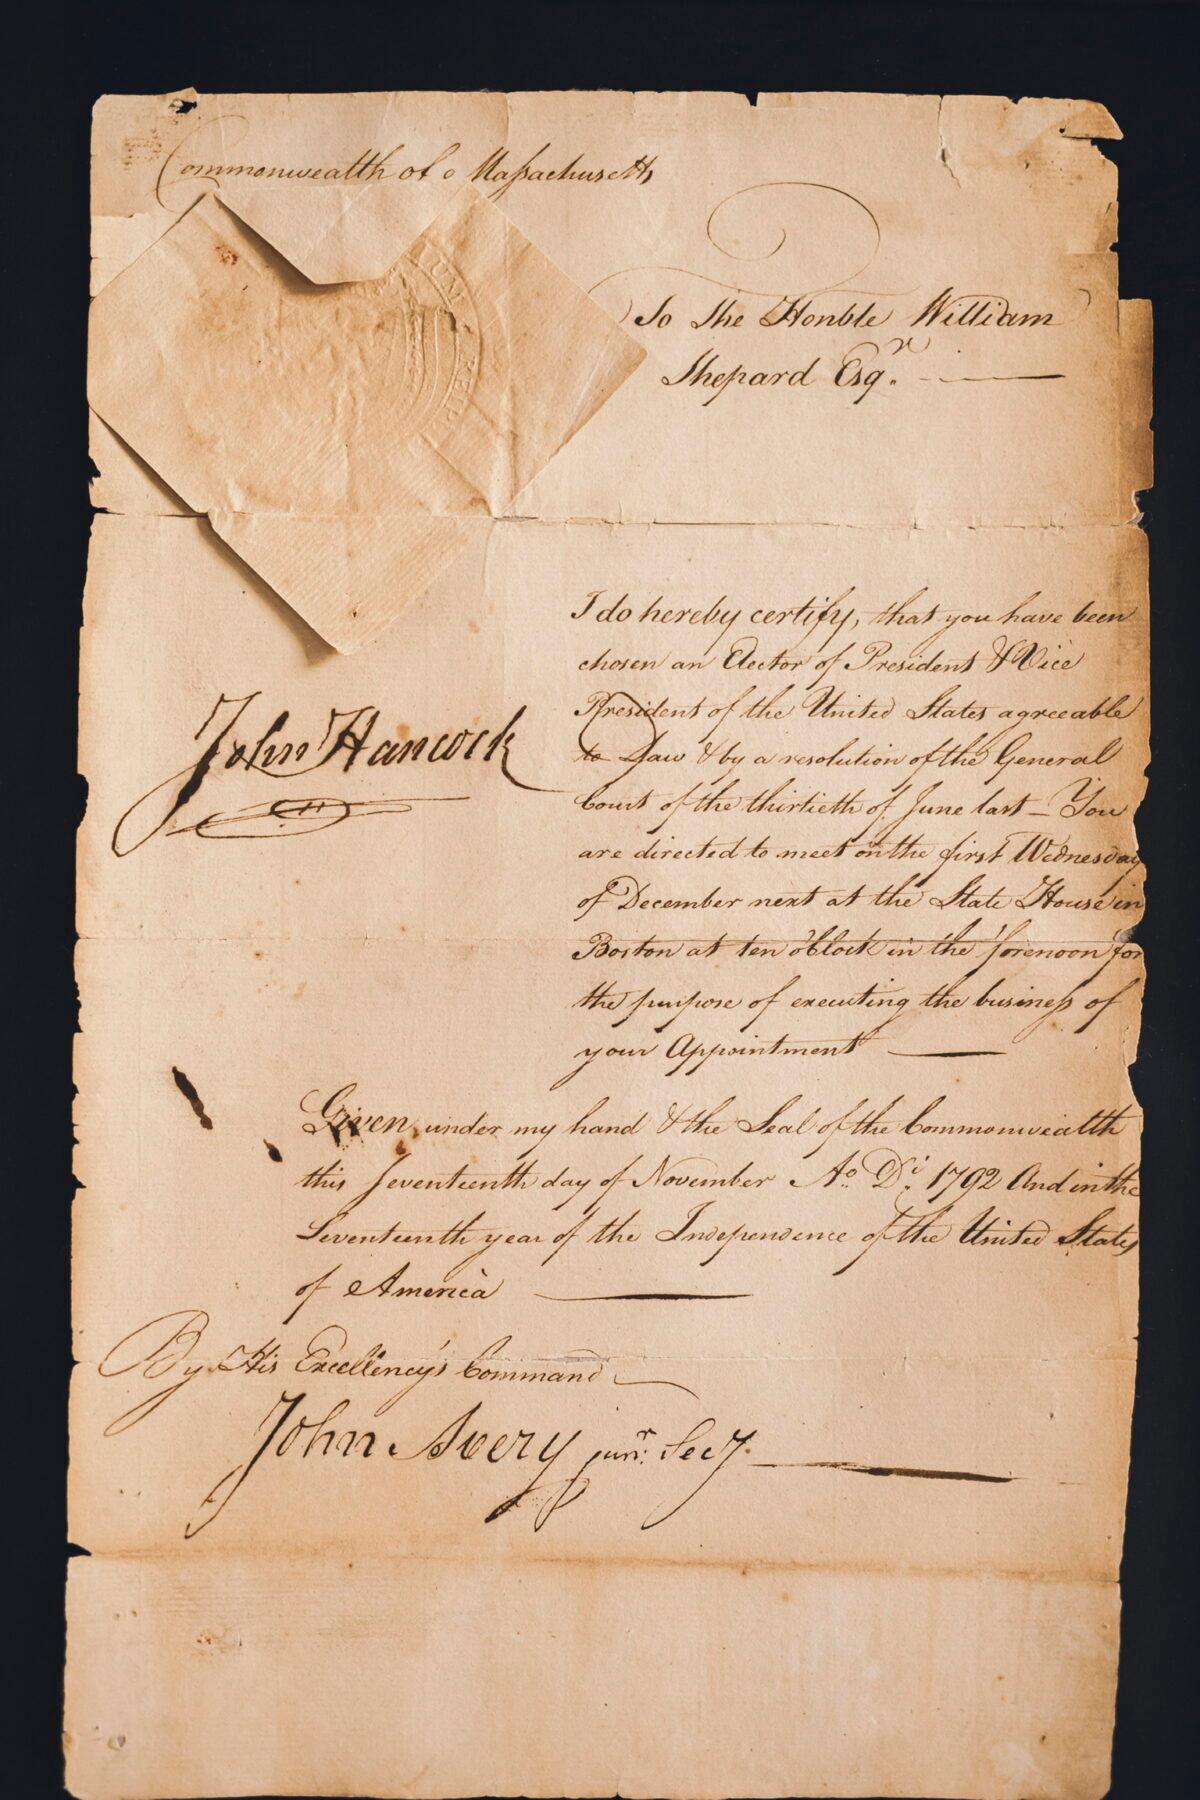 A letter signed by Founding Father John Hancock on Nov. 17, 1792. (Tatsiana Moon for American Essence)